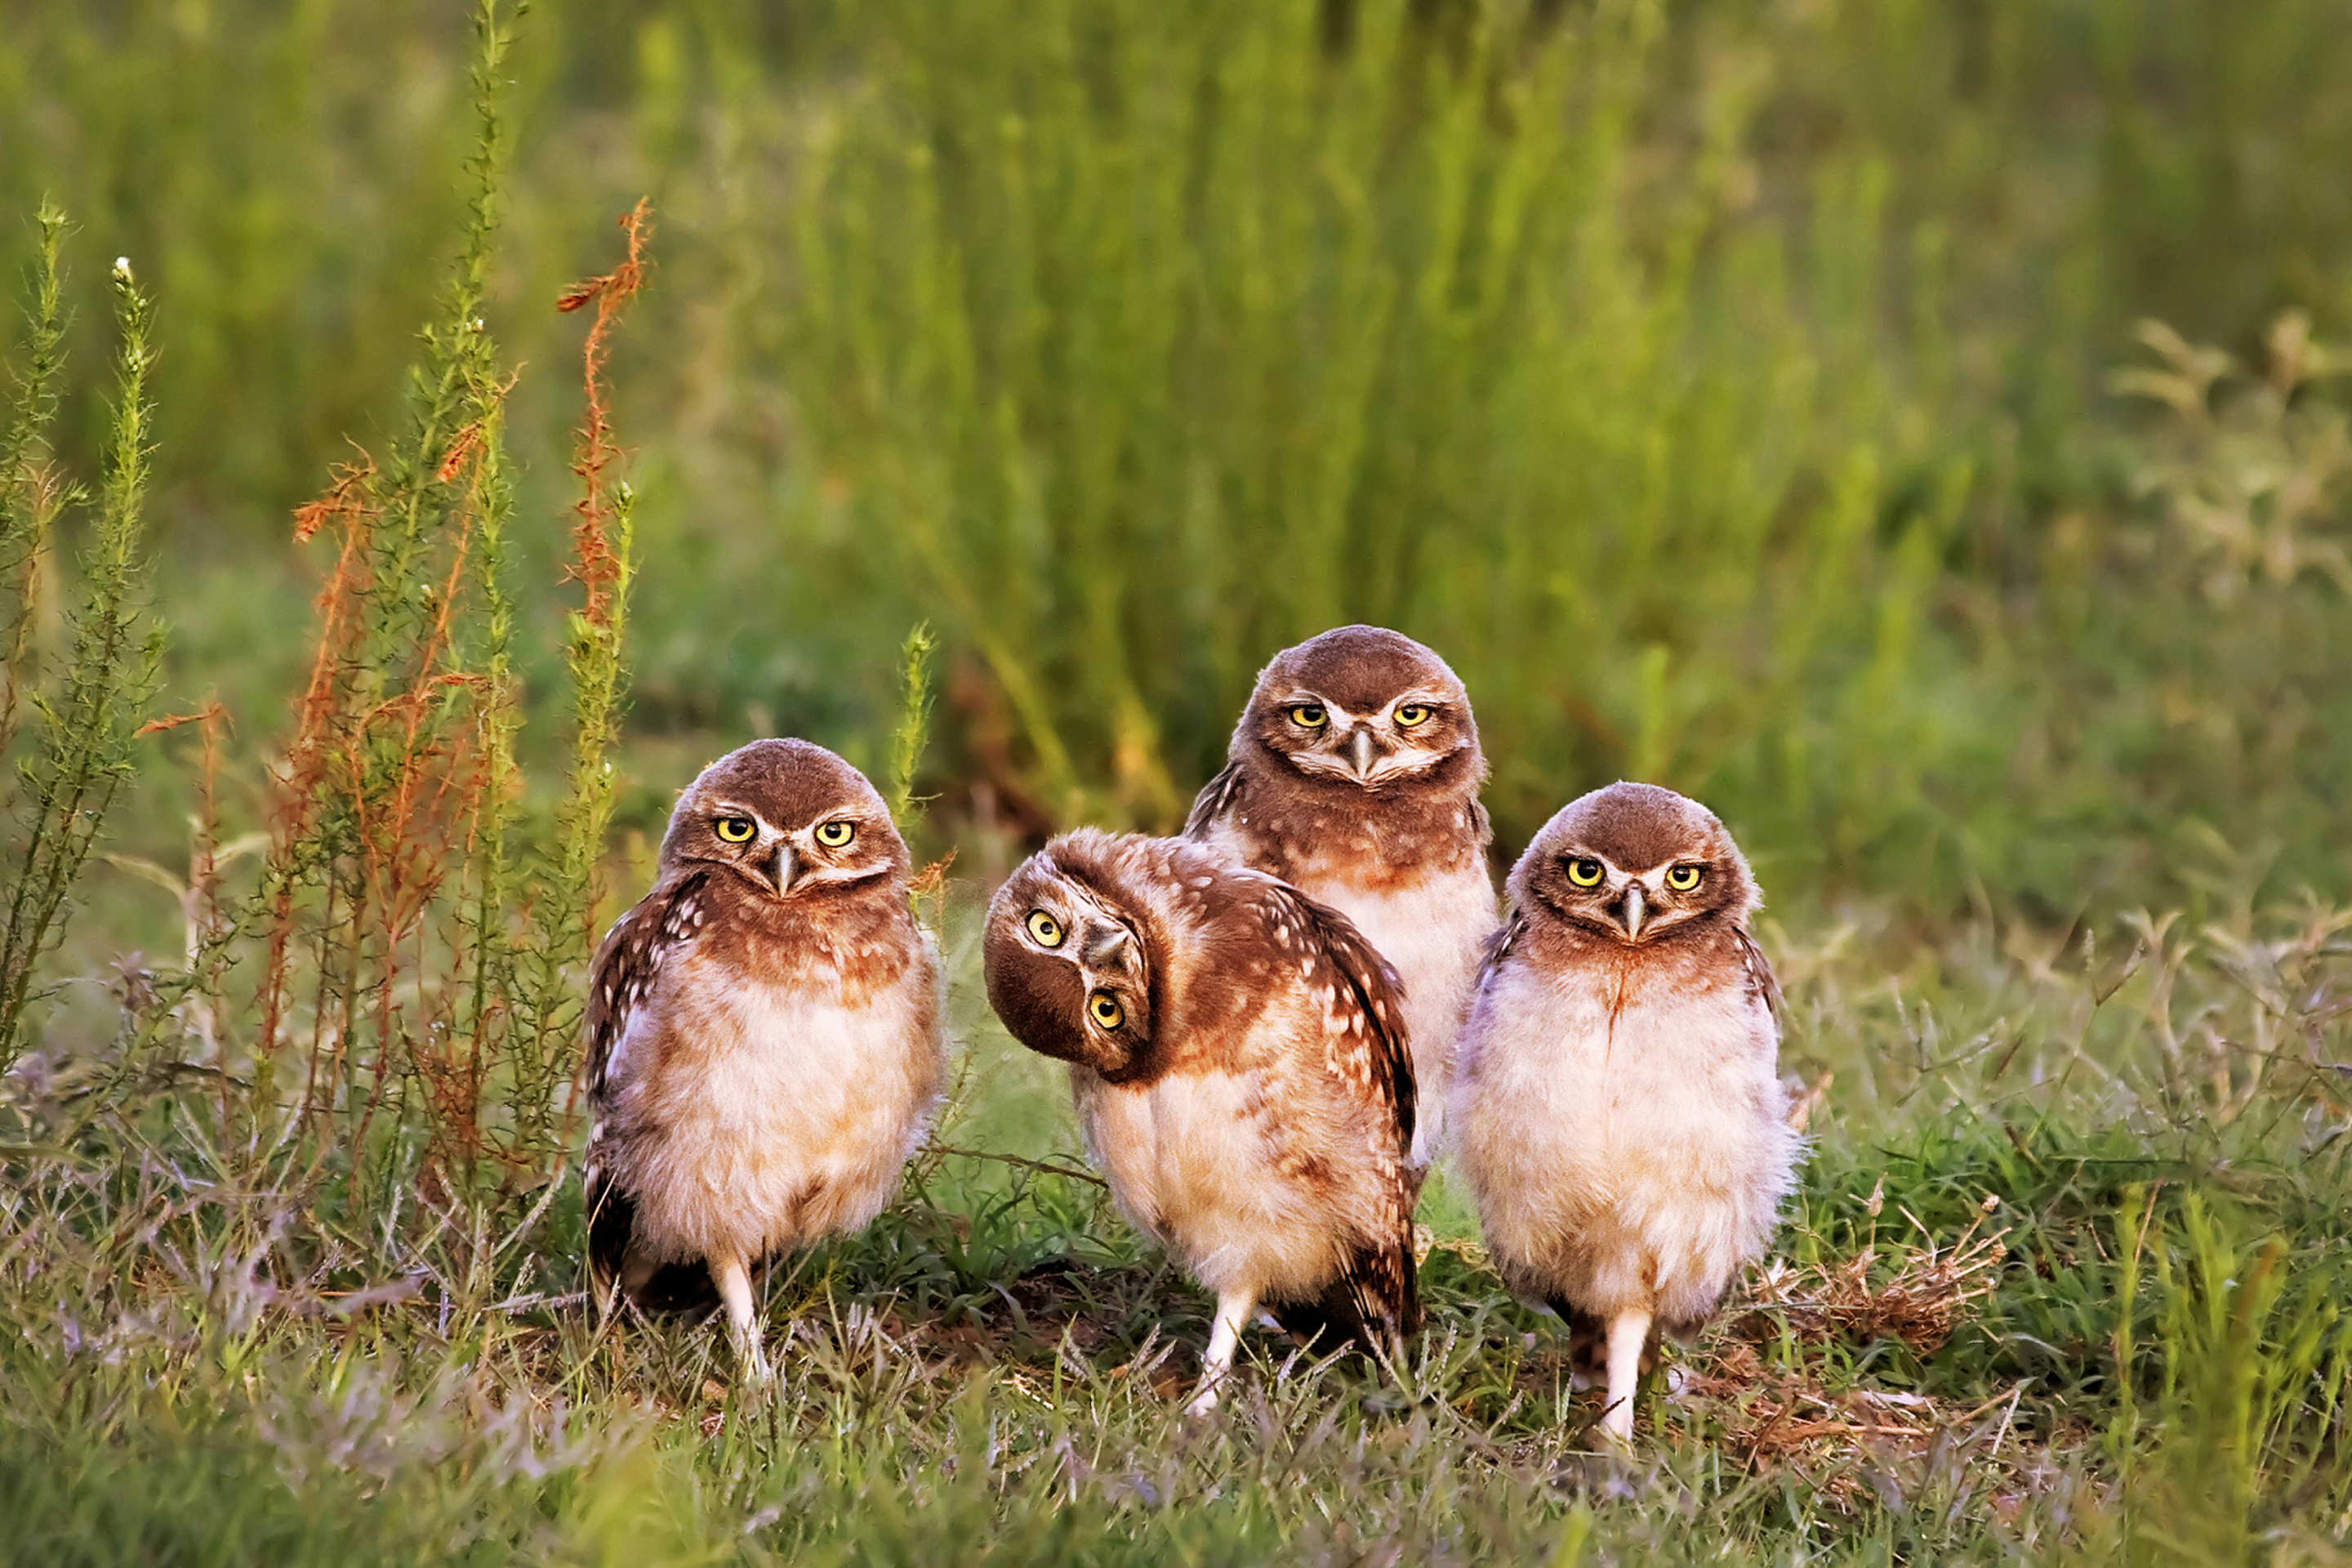 Das Morning with owls Wallpaper 2880x1920